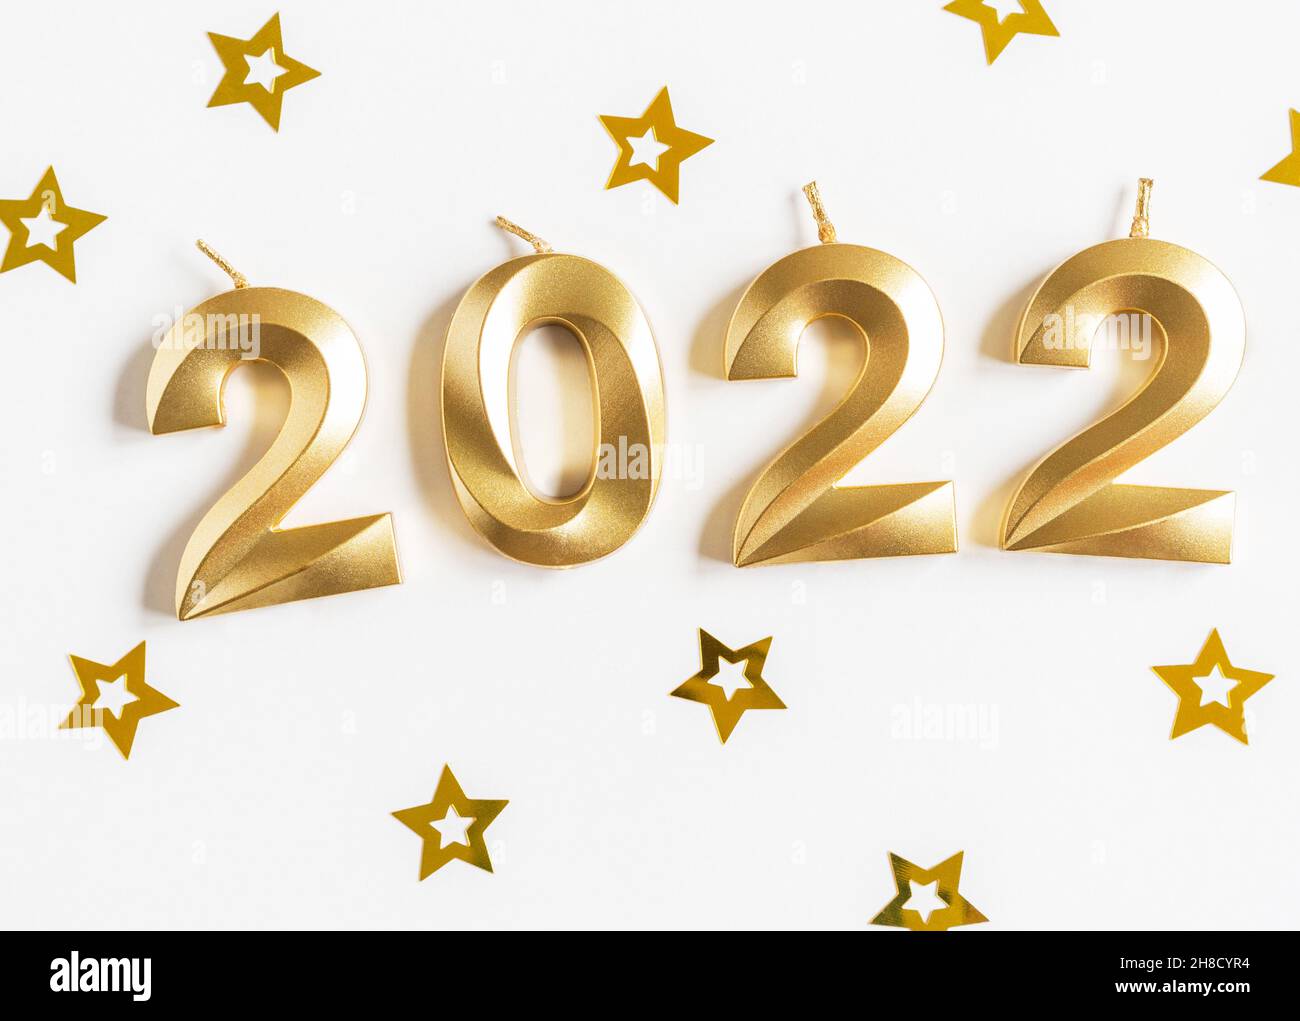 Greeting card - happy new year with numbers 2022, gold stars glitter on white background. Minimal holiday concept. Top view. Flat lay Stock Photo